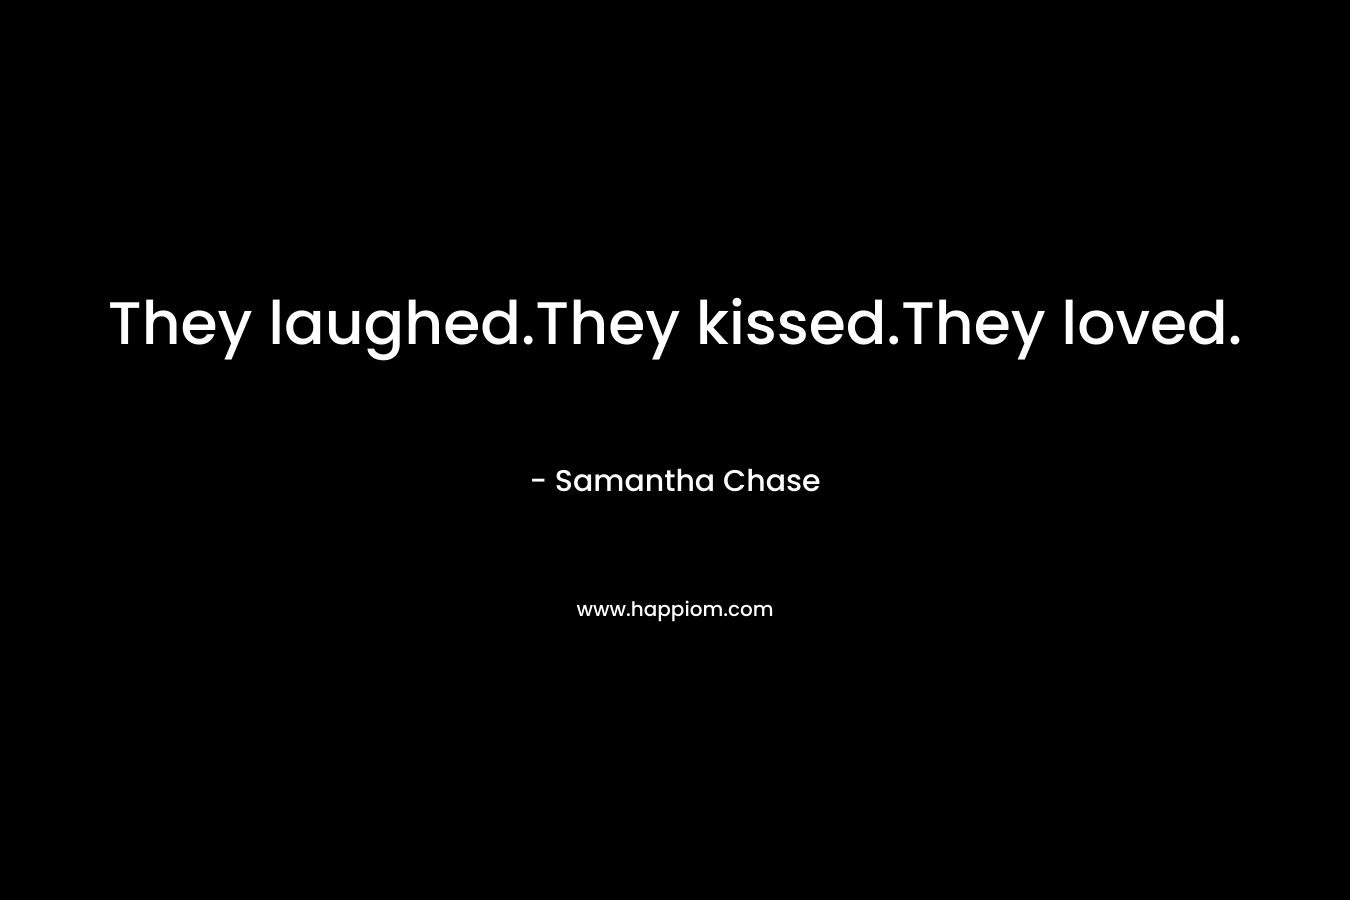 They laughed.They kissed.They loved.